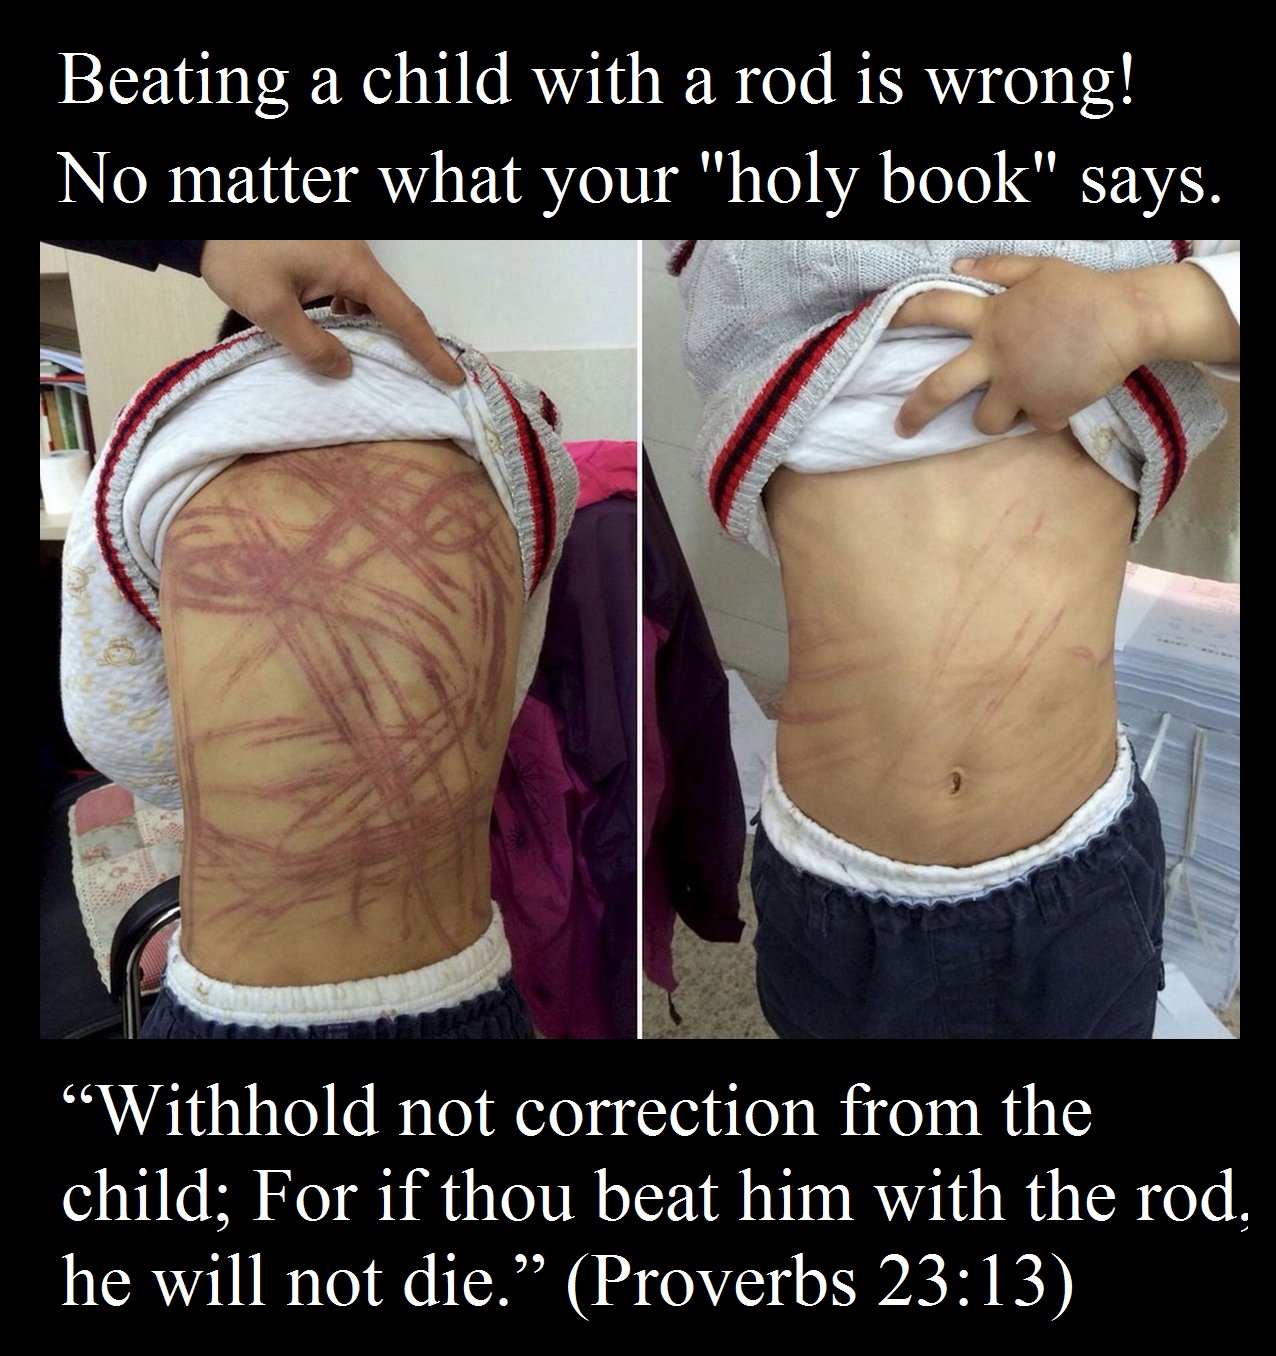 “Withhold not correction from the child; For if thou beat him with the rod, he will not die.” (Proverbs 23:13)